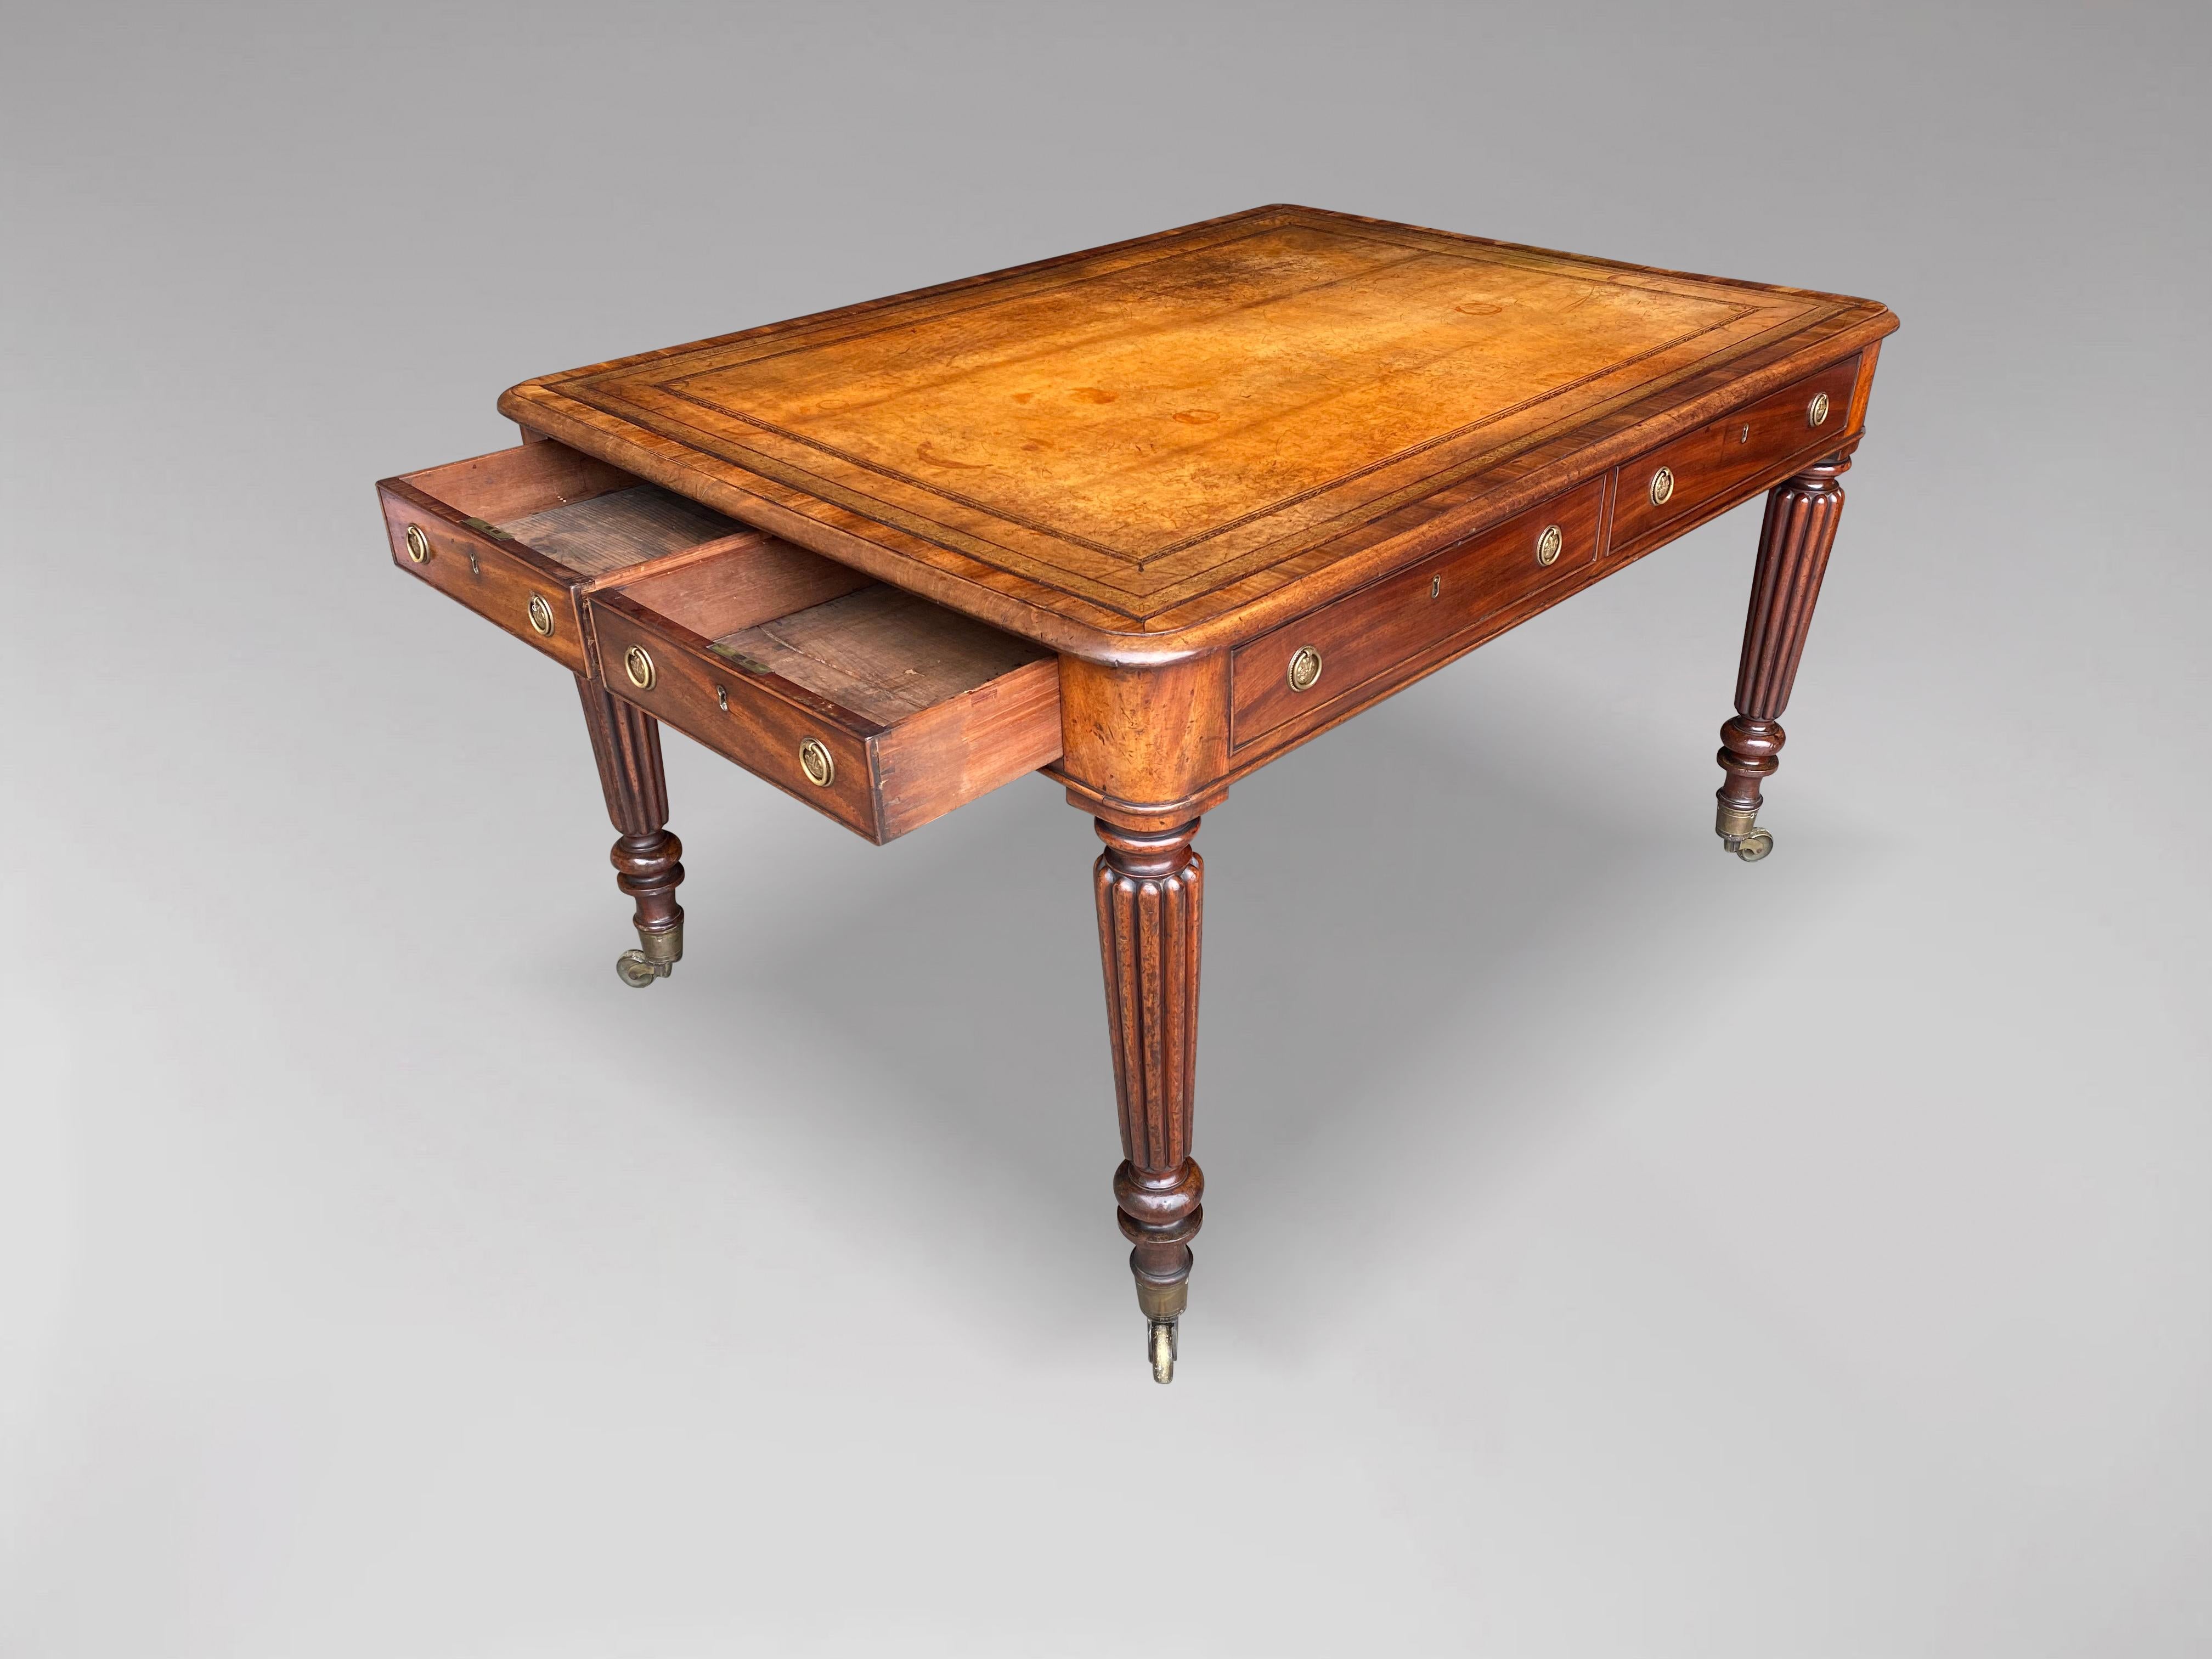 Hand-Crafted Early 19th Century Regency Period Mahogany Partners Writing Table